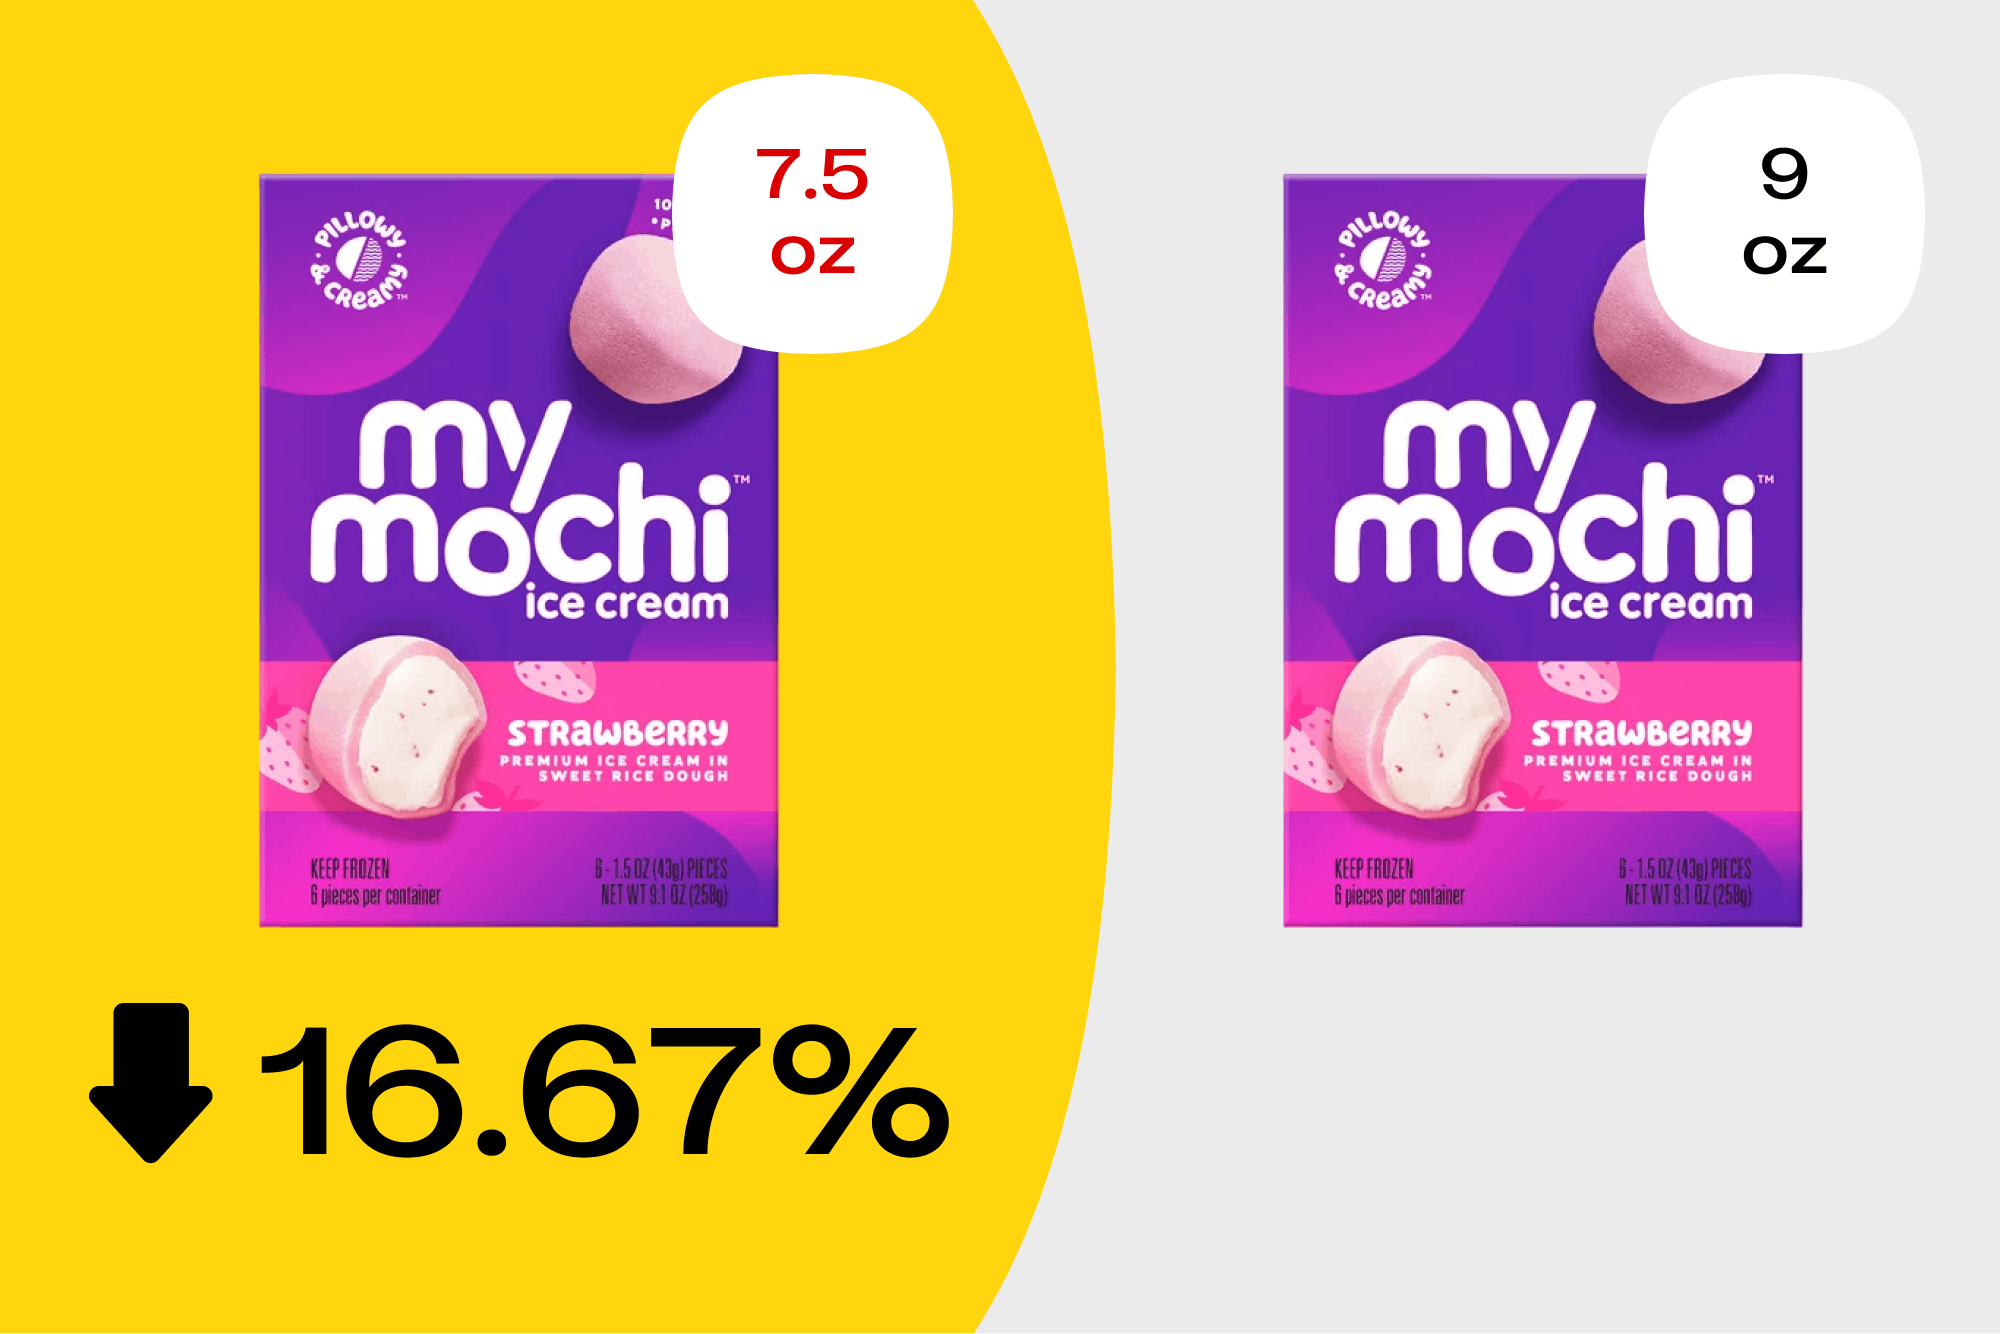 Graphic showing how My Mochi is now 16.67% smaller thanks to shrinkflation